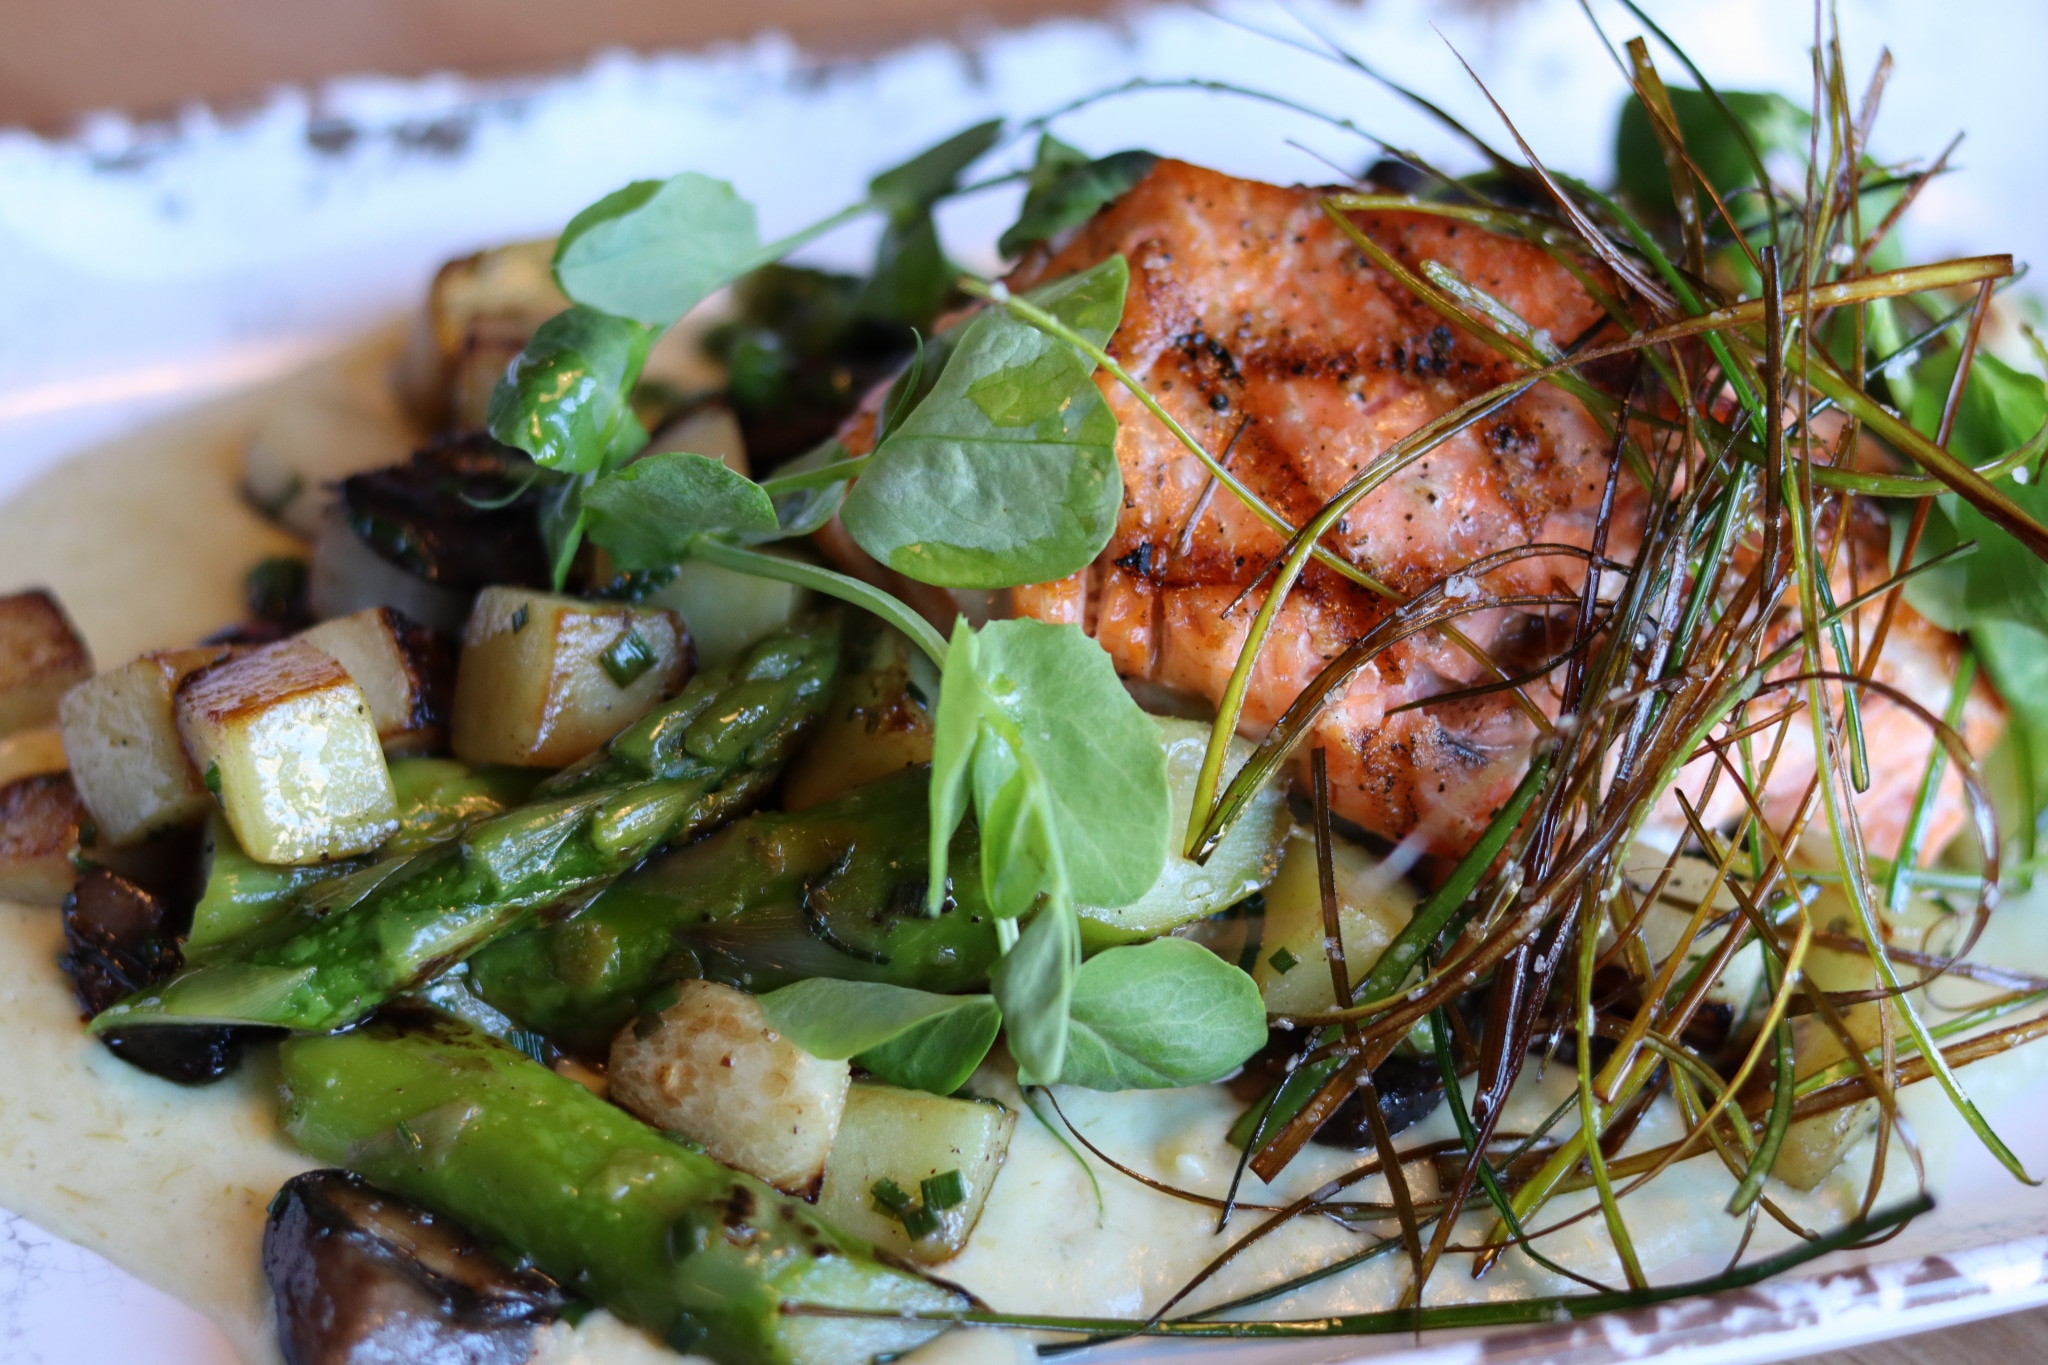 The salmon dish at Woolworth is one of the many healthy options on the Woolworth lunch menu. (Photo by Christine Hull for Bham Now)